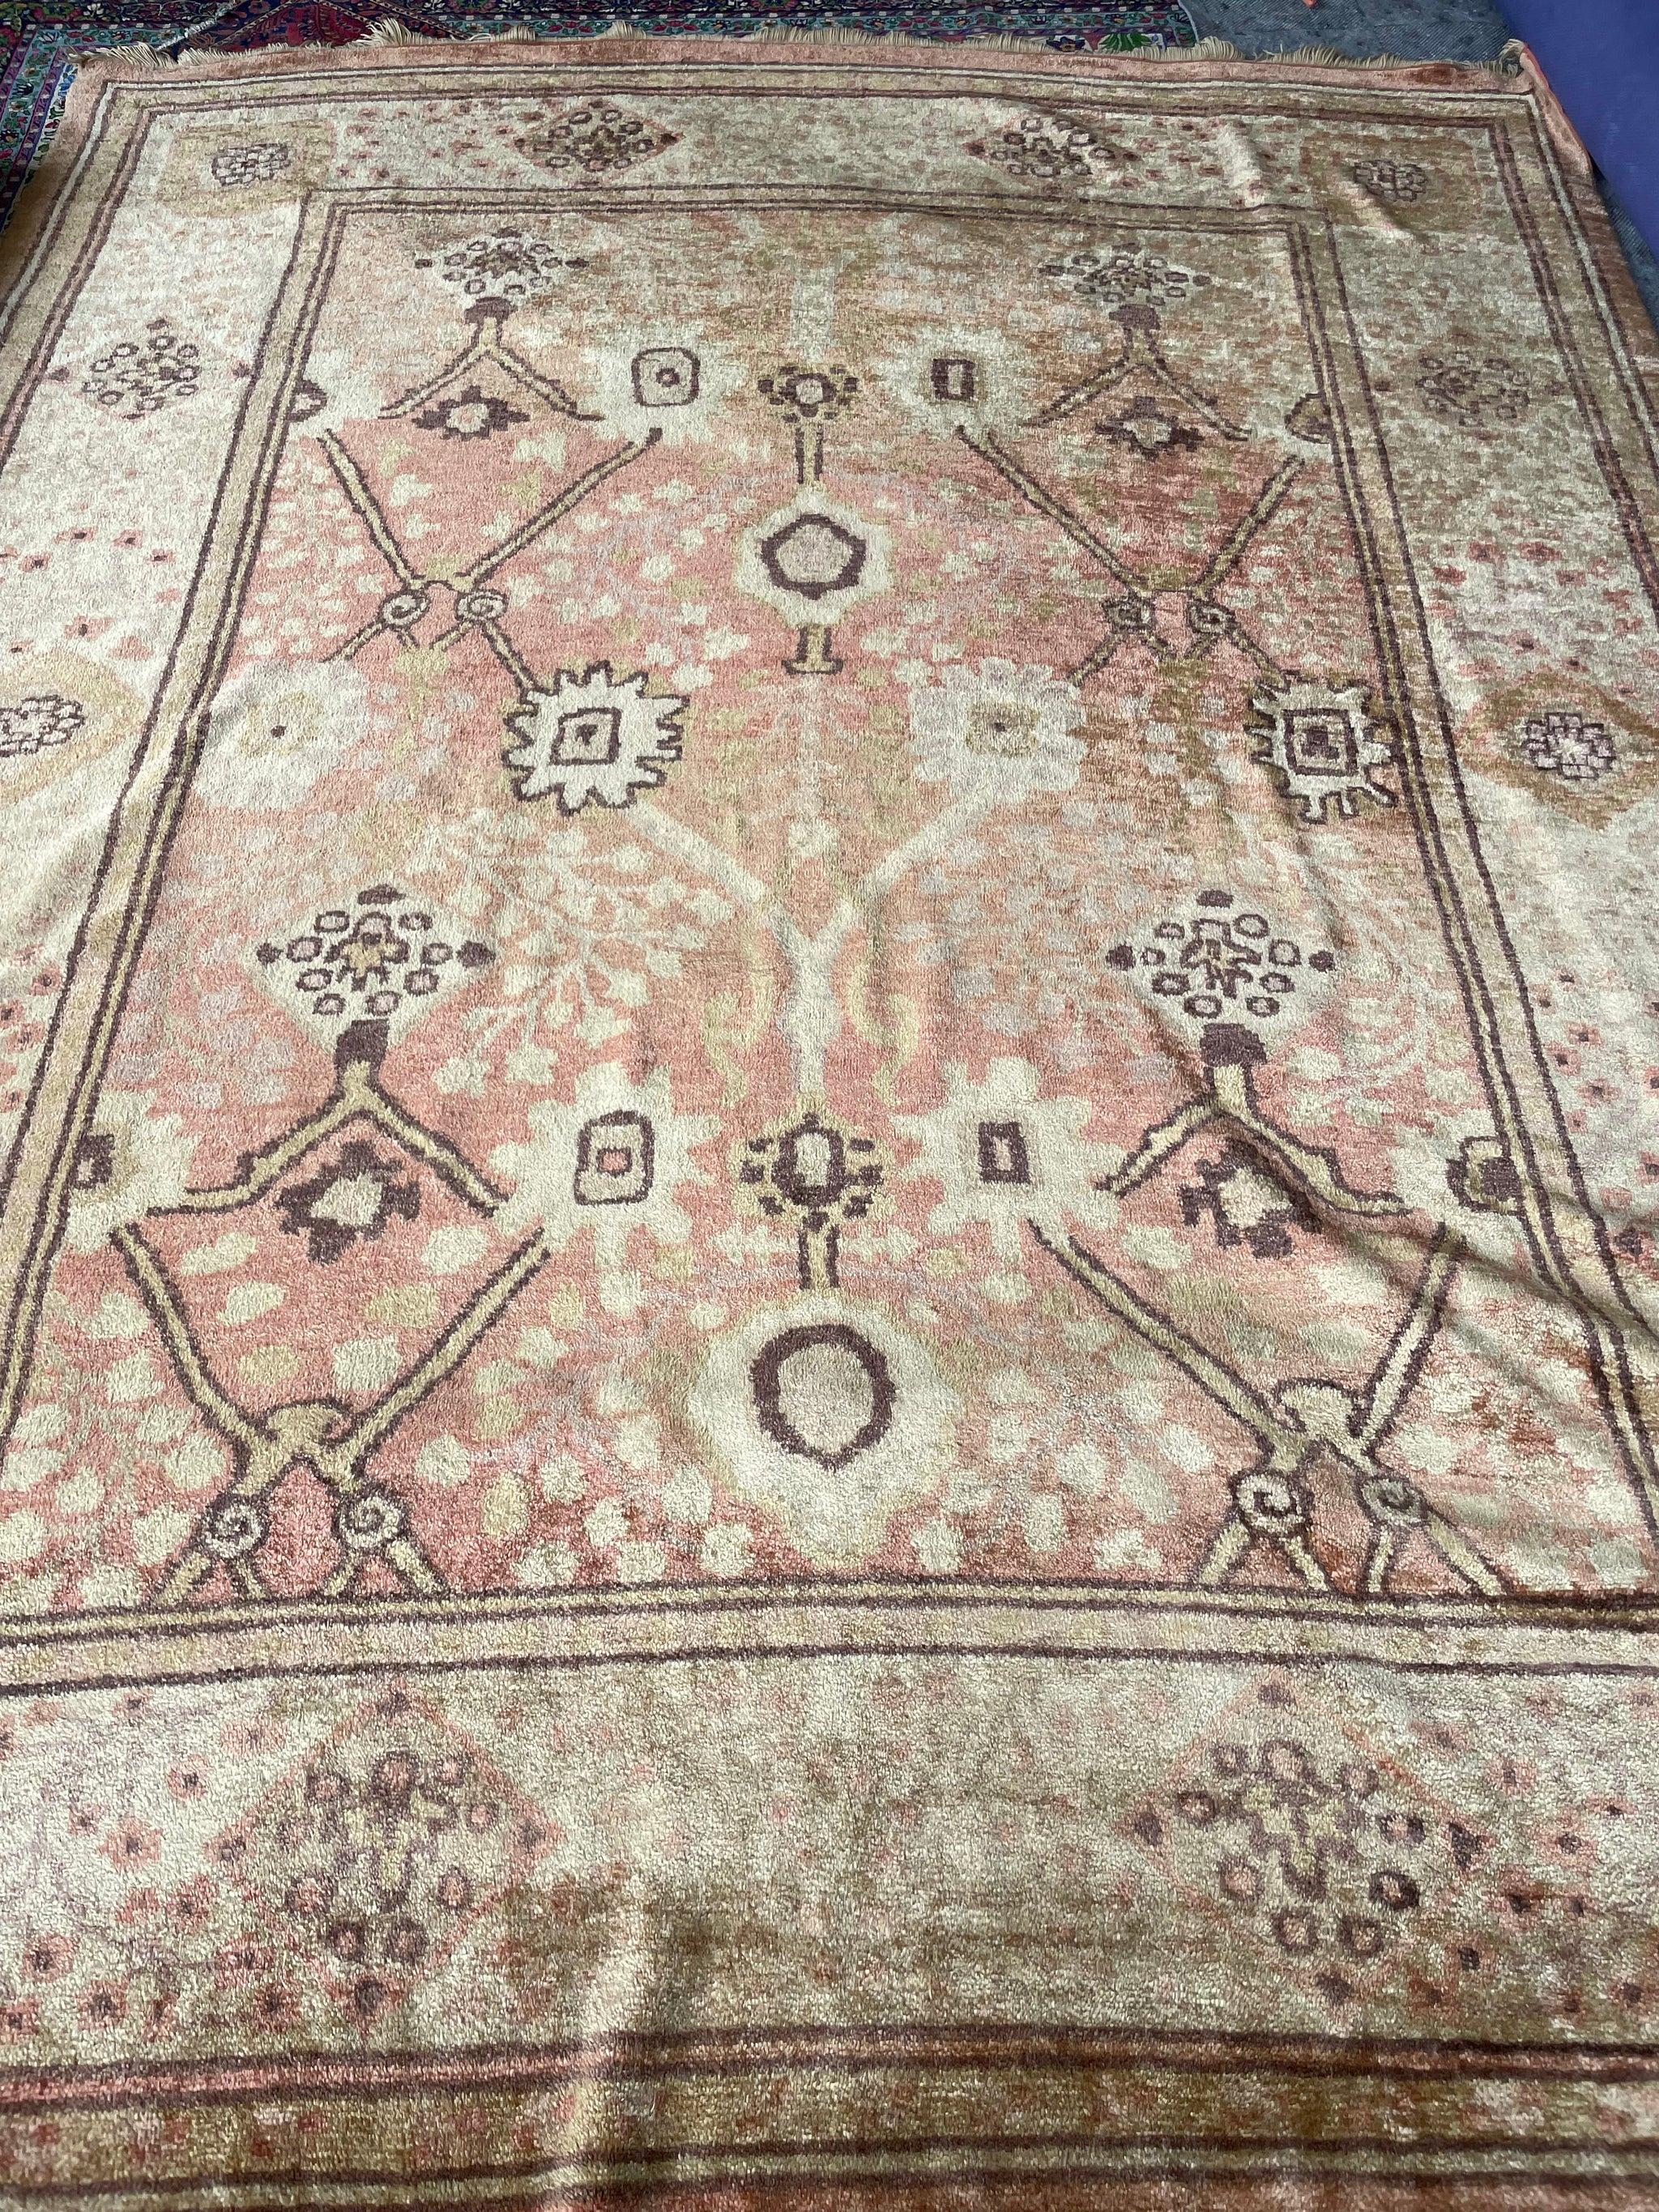 Glowing Vintage Oushak Rug  Ancient Design with Glossy Plush Wool in Salmon, Pink, Gold, Aubergine, Camel

This piece shifts hues from whatever side you look at it and how the light hits it, so just keep in mind the truest colors are on a sliding